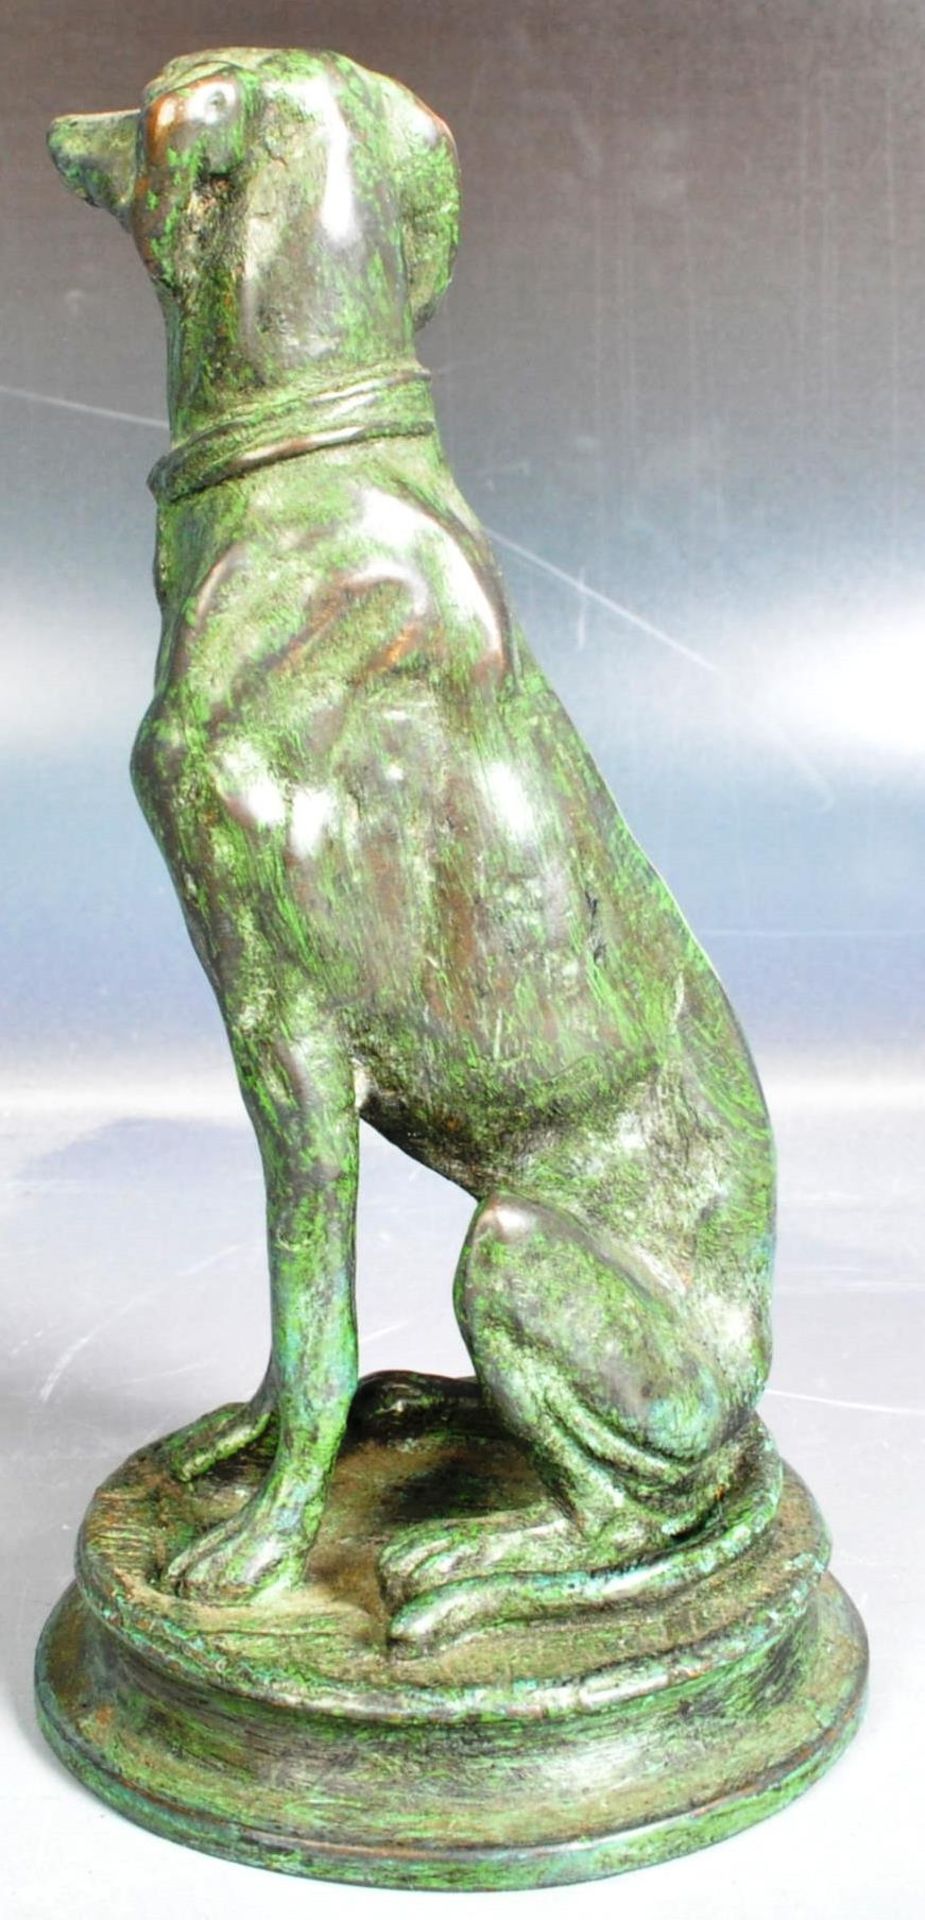 19TH CENTURY BRONZE ORNAMENT FIGURE IN THE FORM OF A GREYHOUND - Image 4 of 5